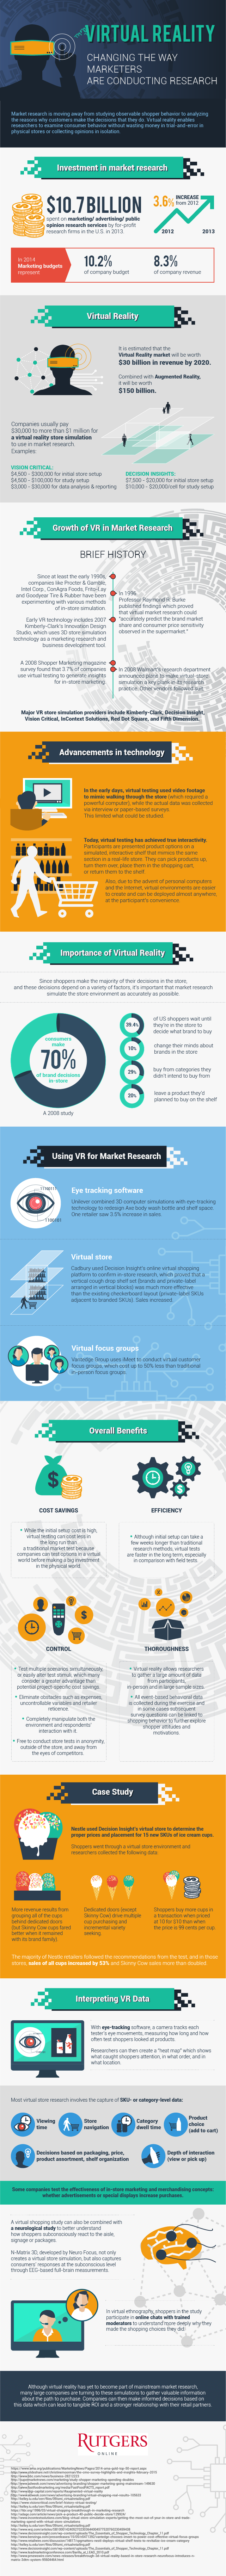 VR is changing the way marketers are conducting research infographic